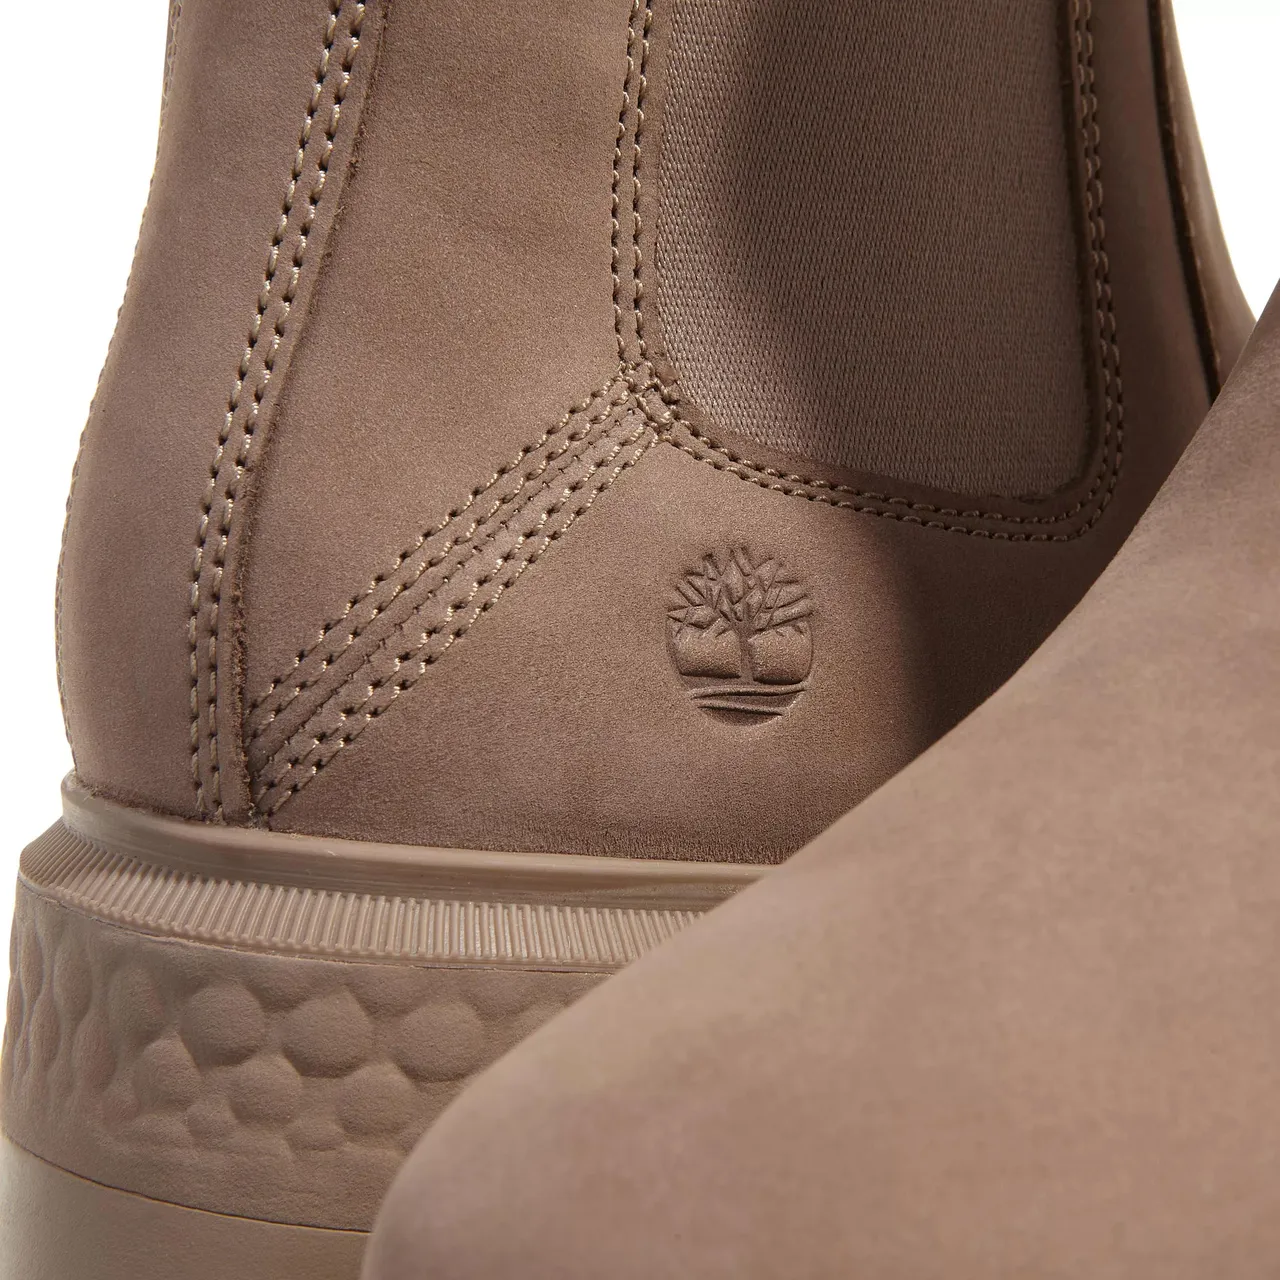 Timberland Boots & Ankle Boots - Cortina Valley Chelsea - taupe - Boots & Ankle Boots for ladies